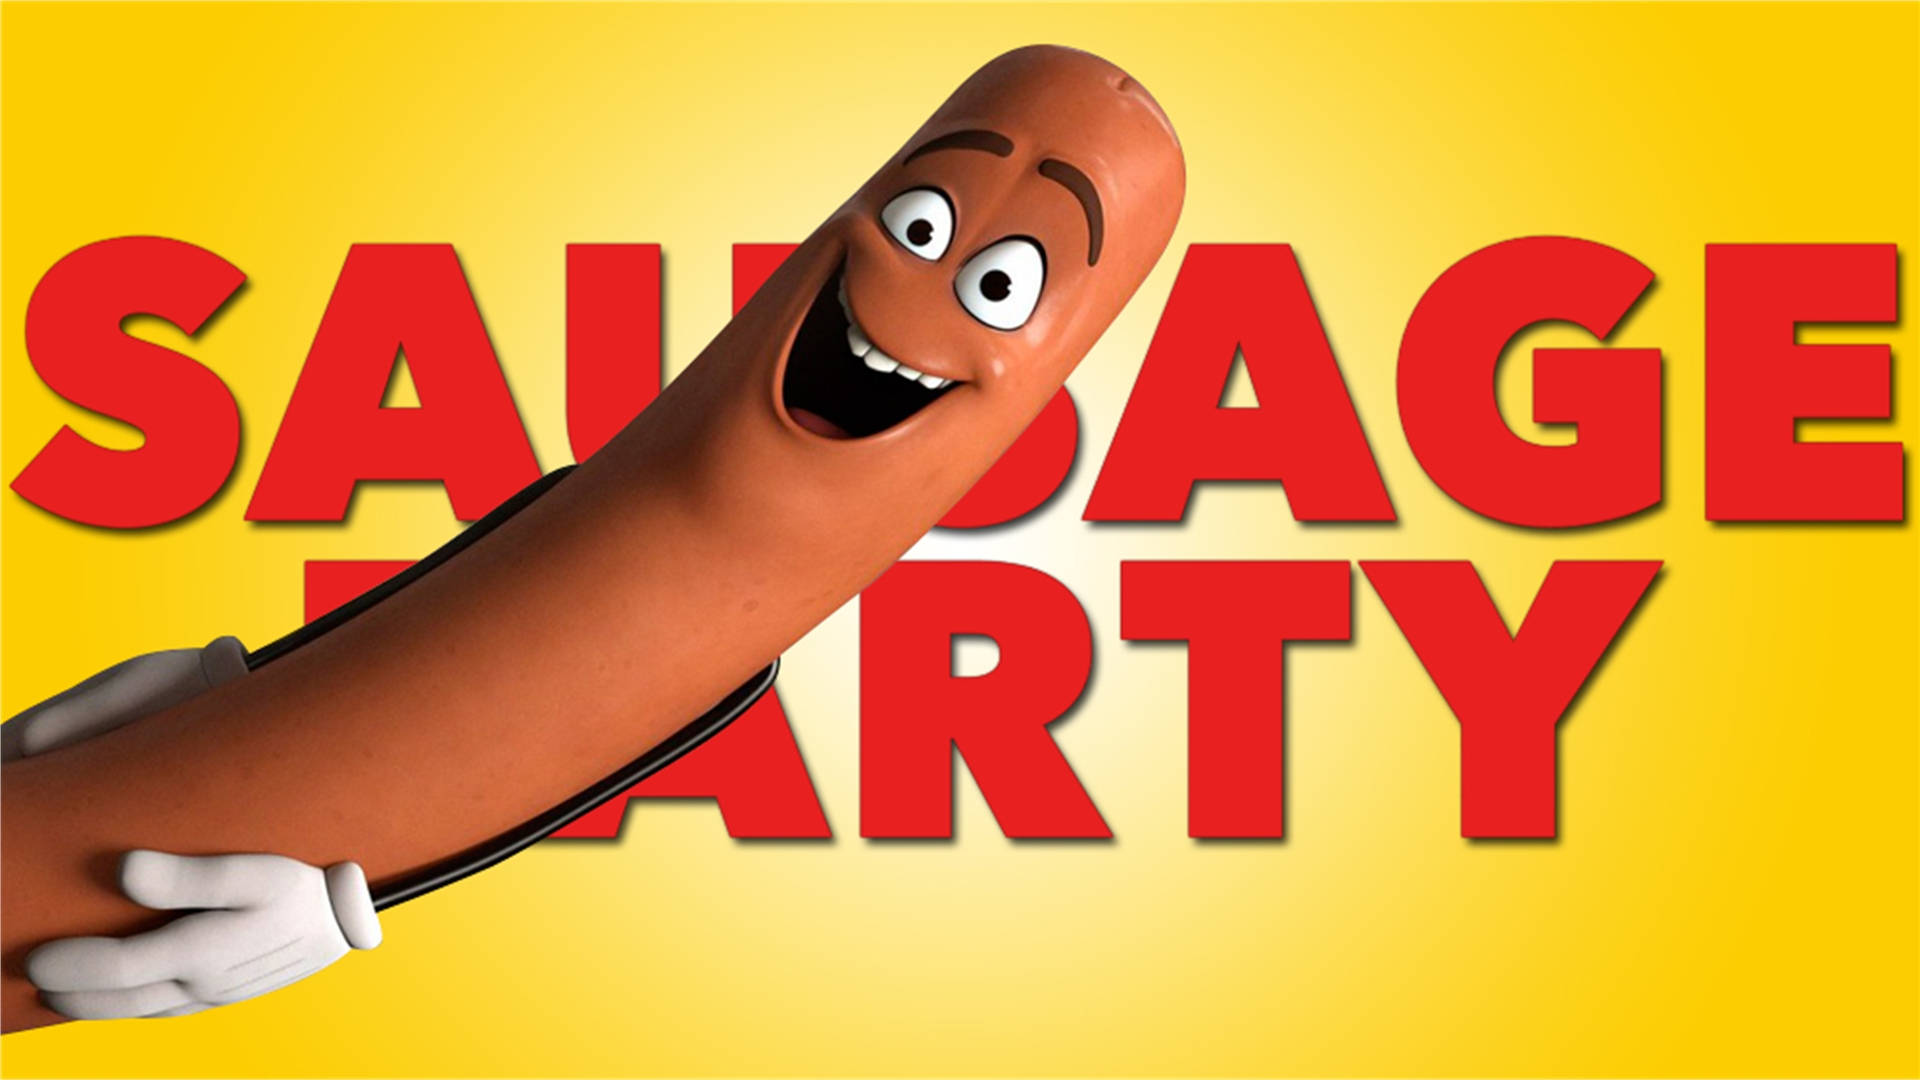 Frank Smiling Sausage Party Background